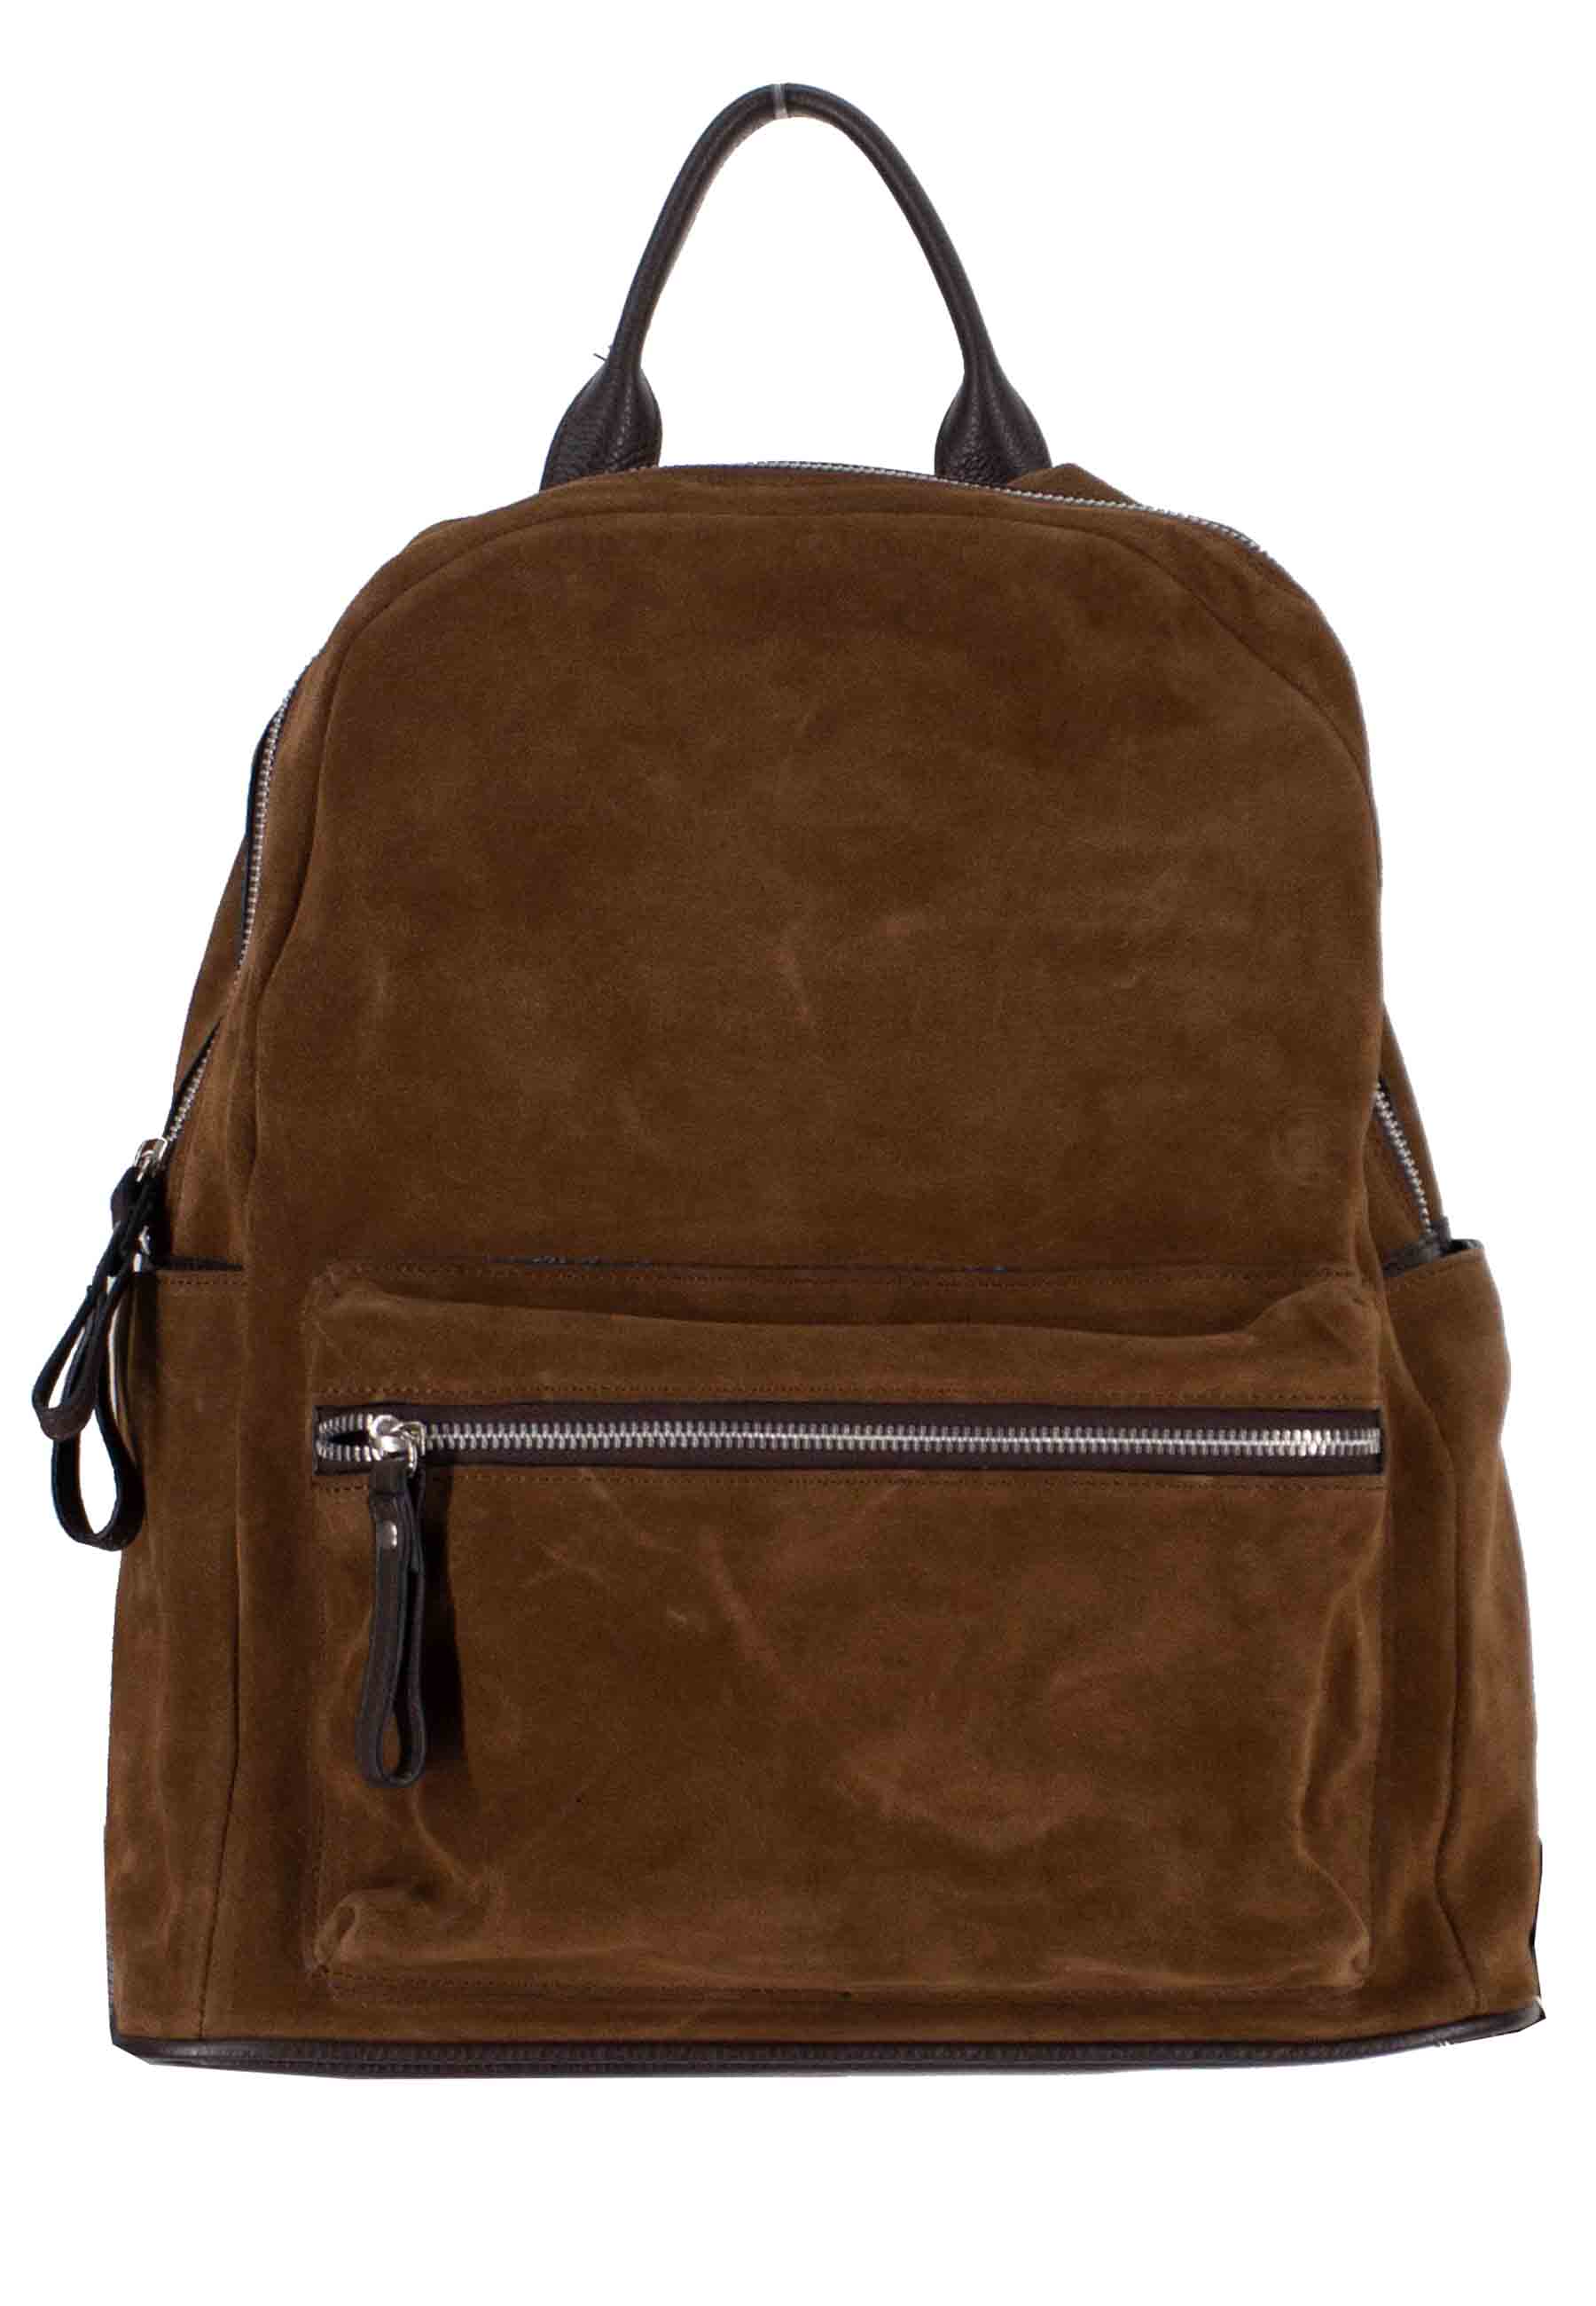 Men's backpack in brown suede with zip opening and leather shoulder straps